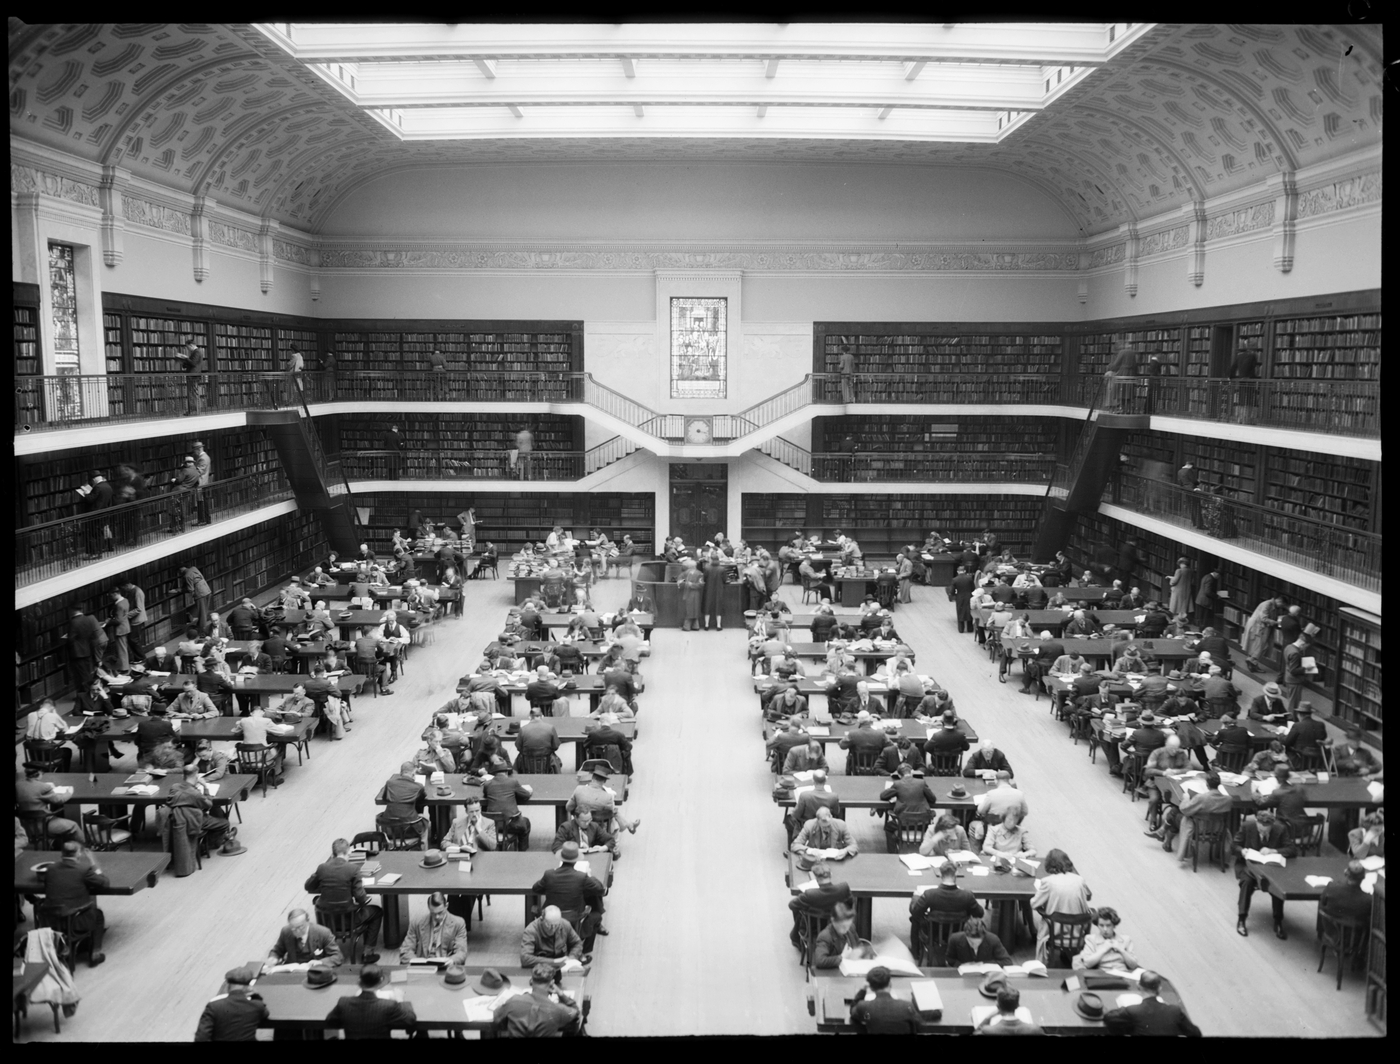 Large room in Library with glass ceiling and books shelves around the circumference of the room. People at desks reading. 